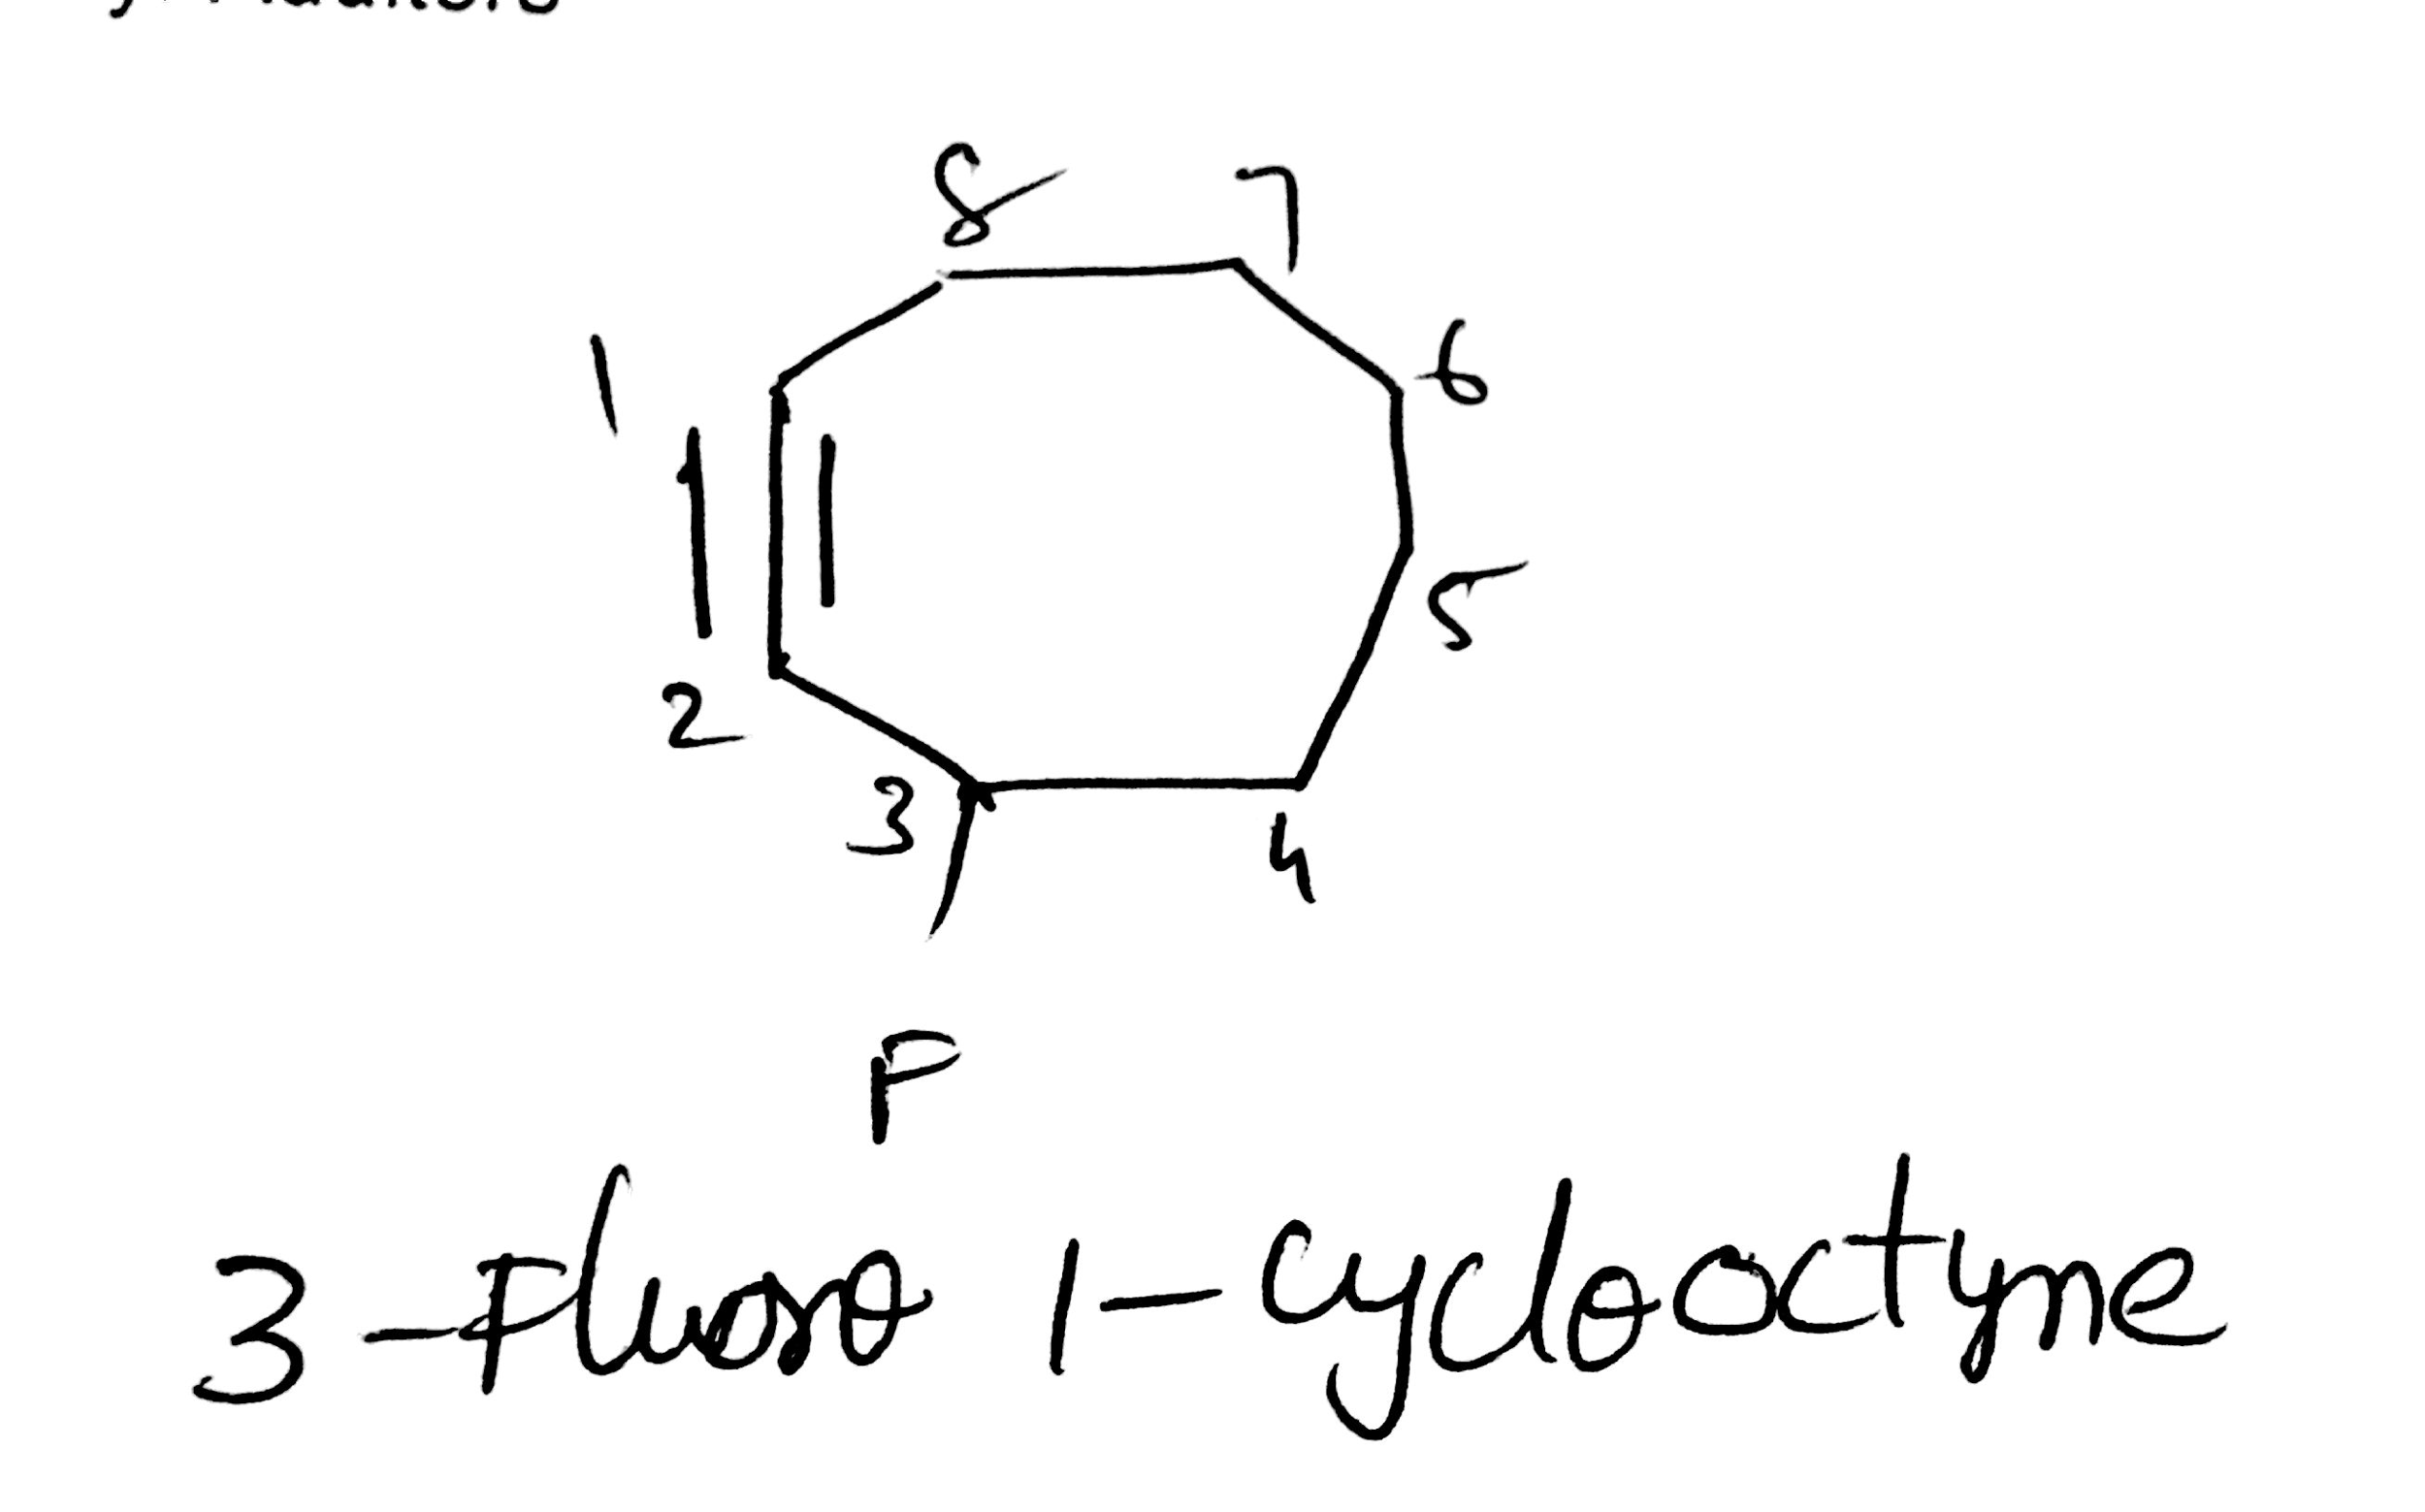 Provide the correct IUPAC/systematic name for the following
compound?
Provide the correct IUPAC/systematic name of the following compound.